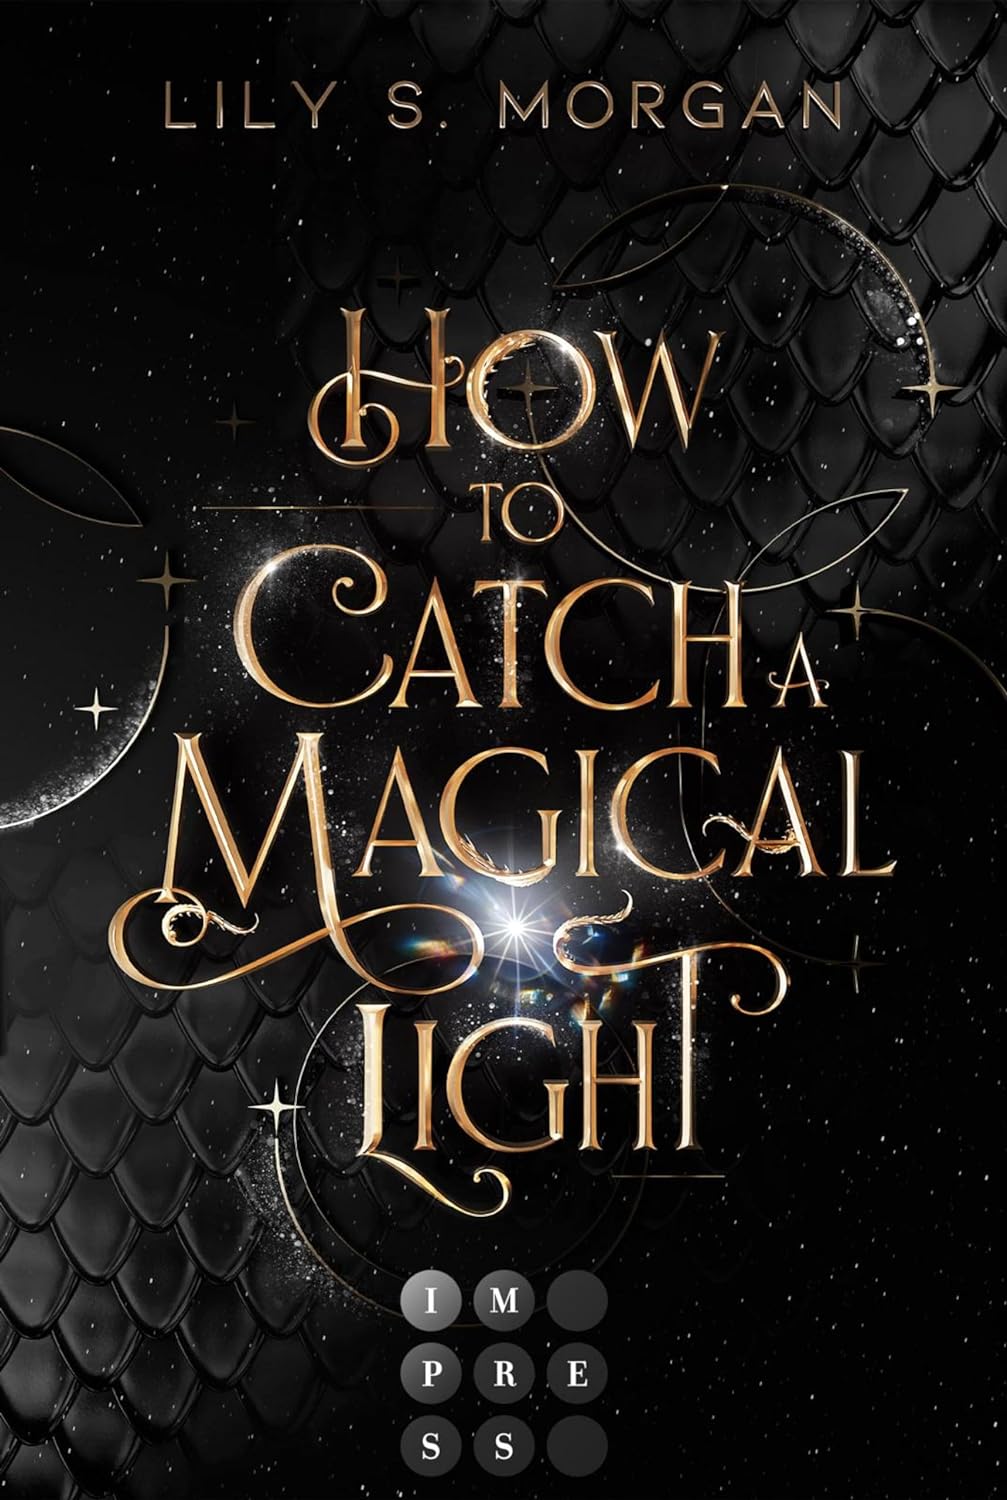 Lily S. Morgan - How To Catch A Magical Light